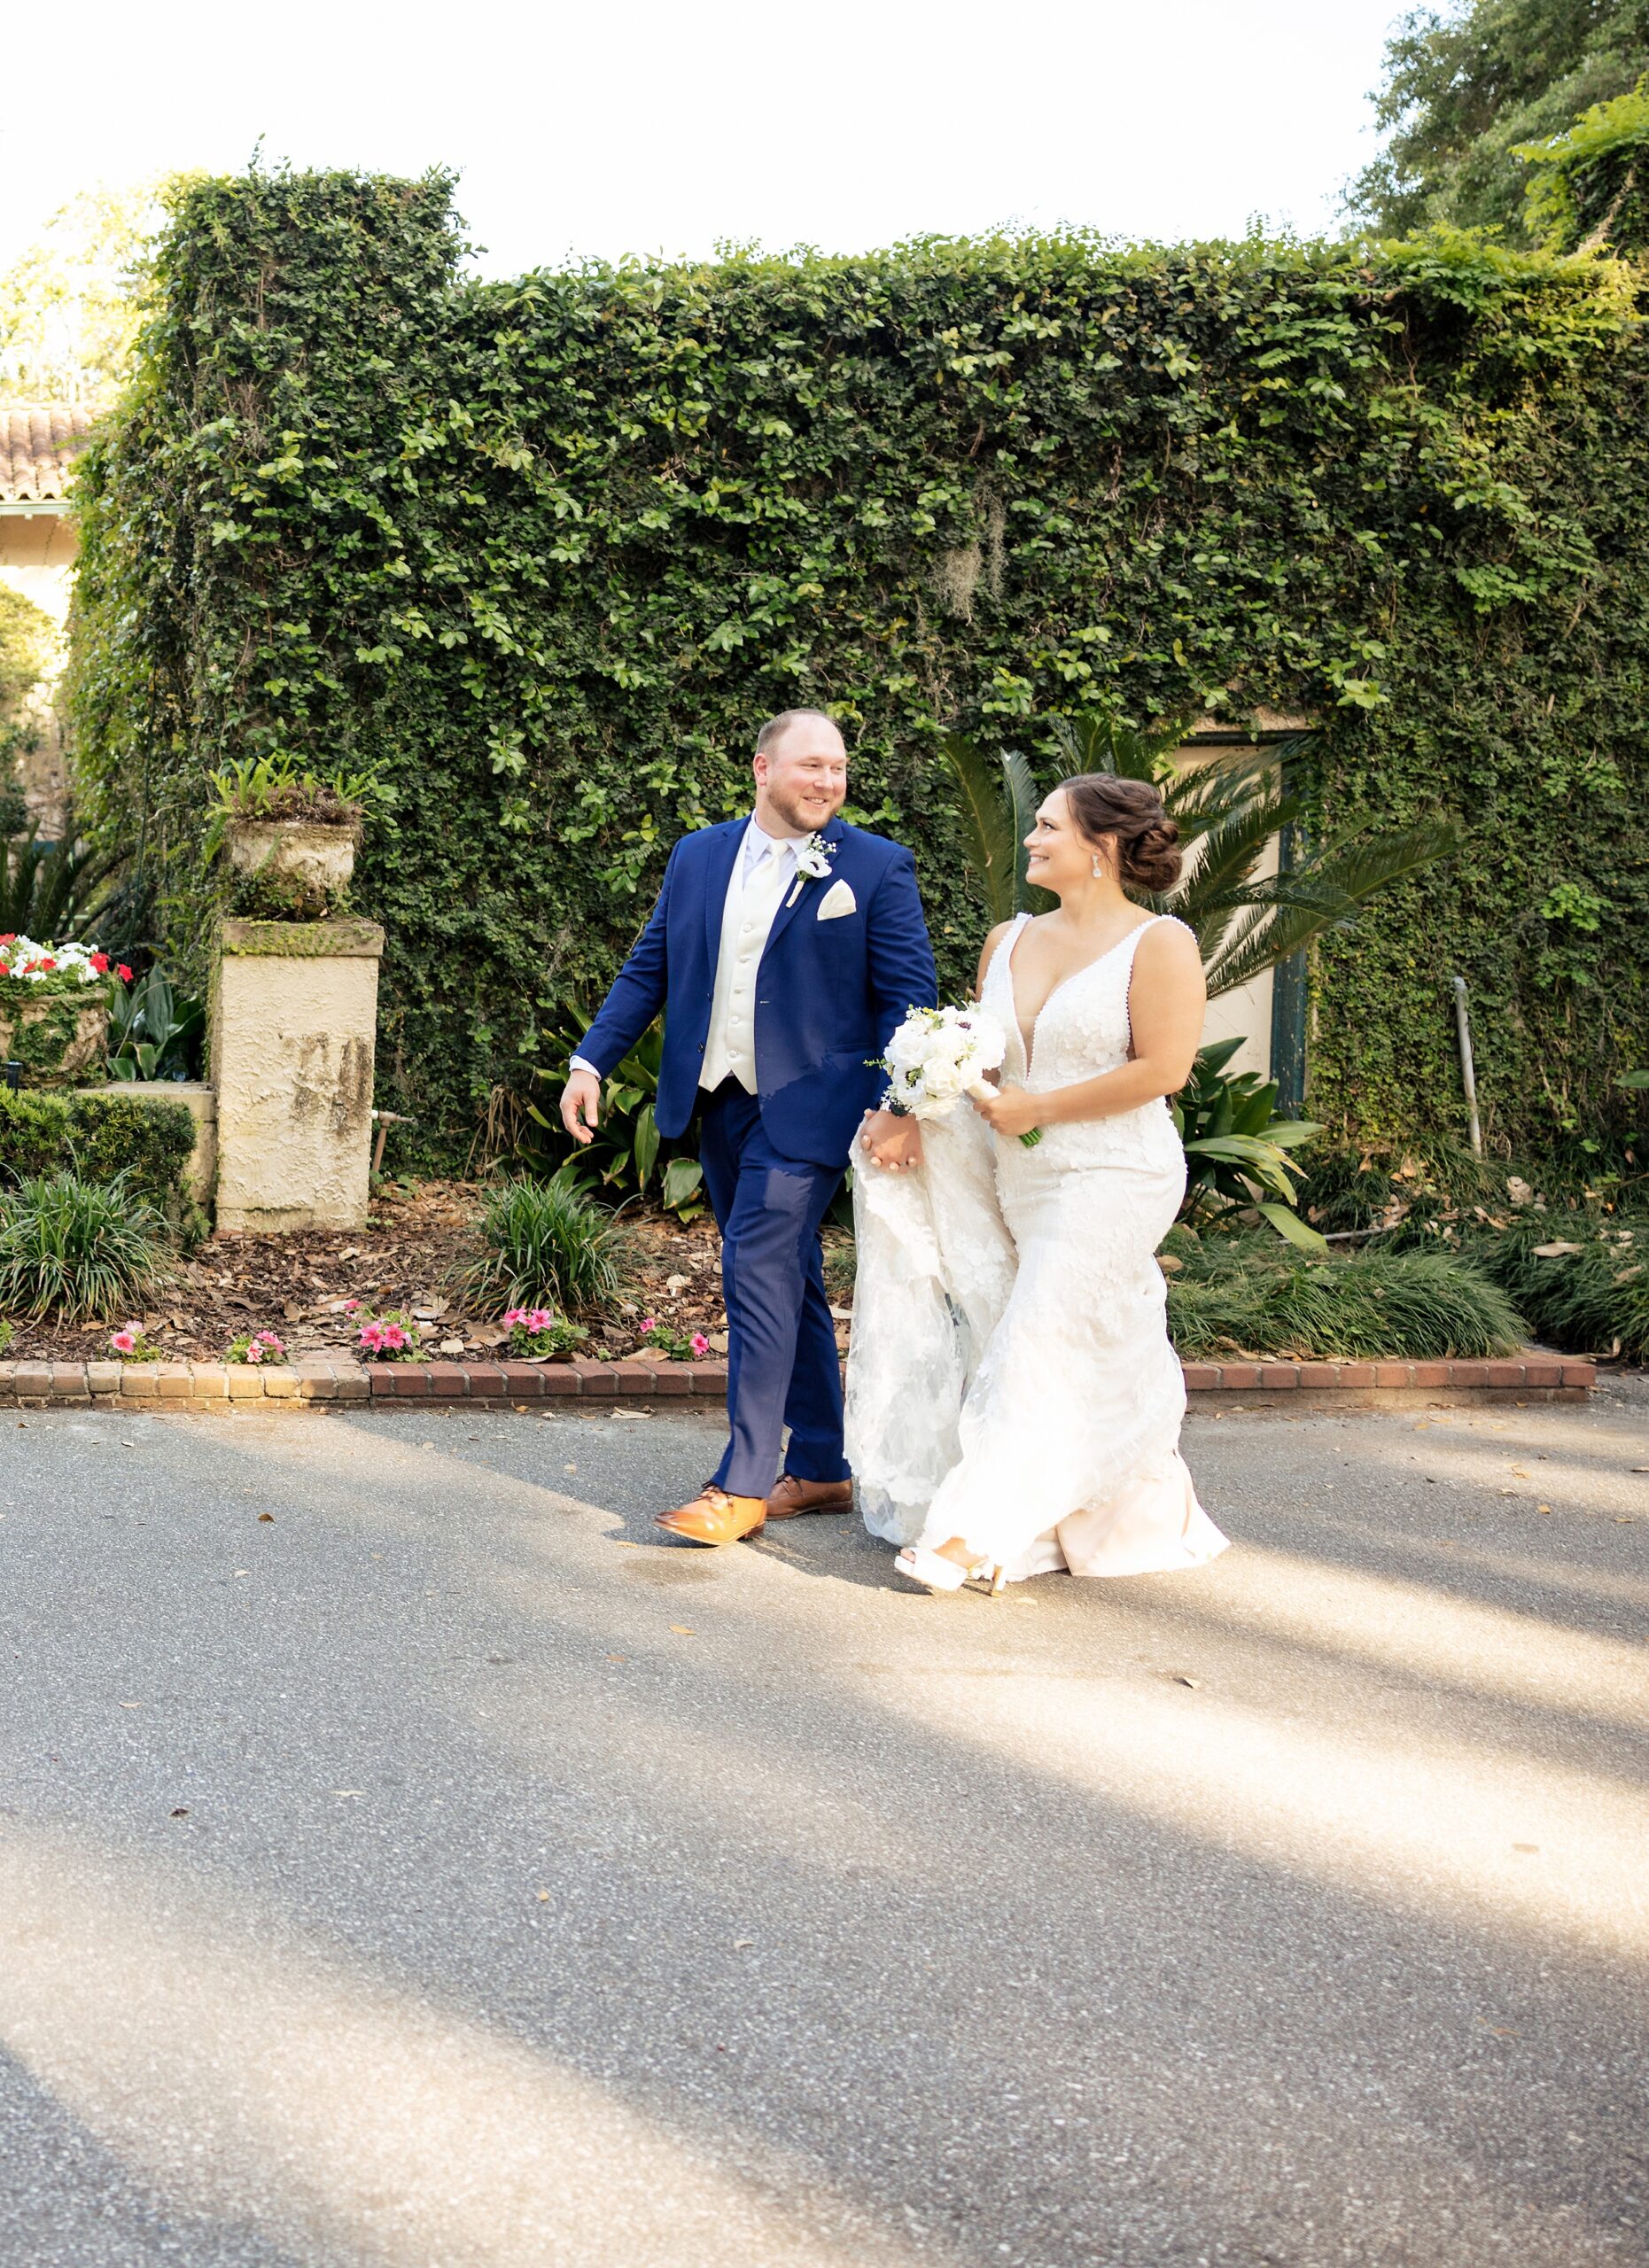 A groom holds the hand of his bride as they walk through a garden